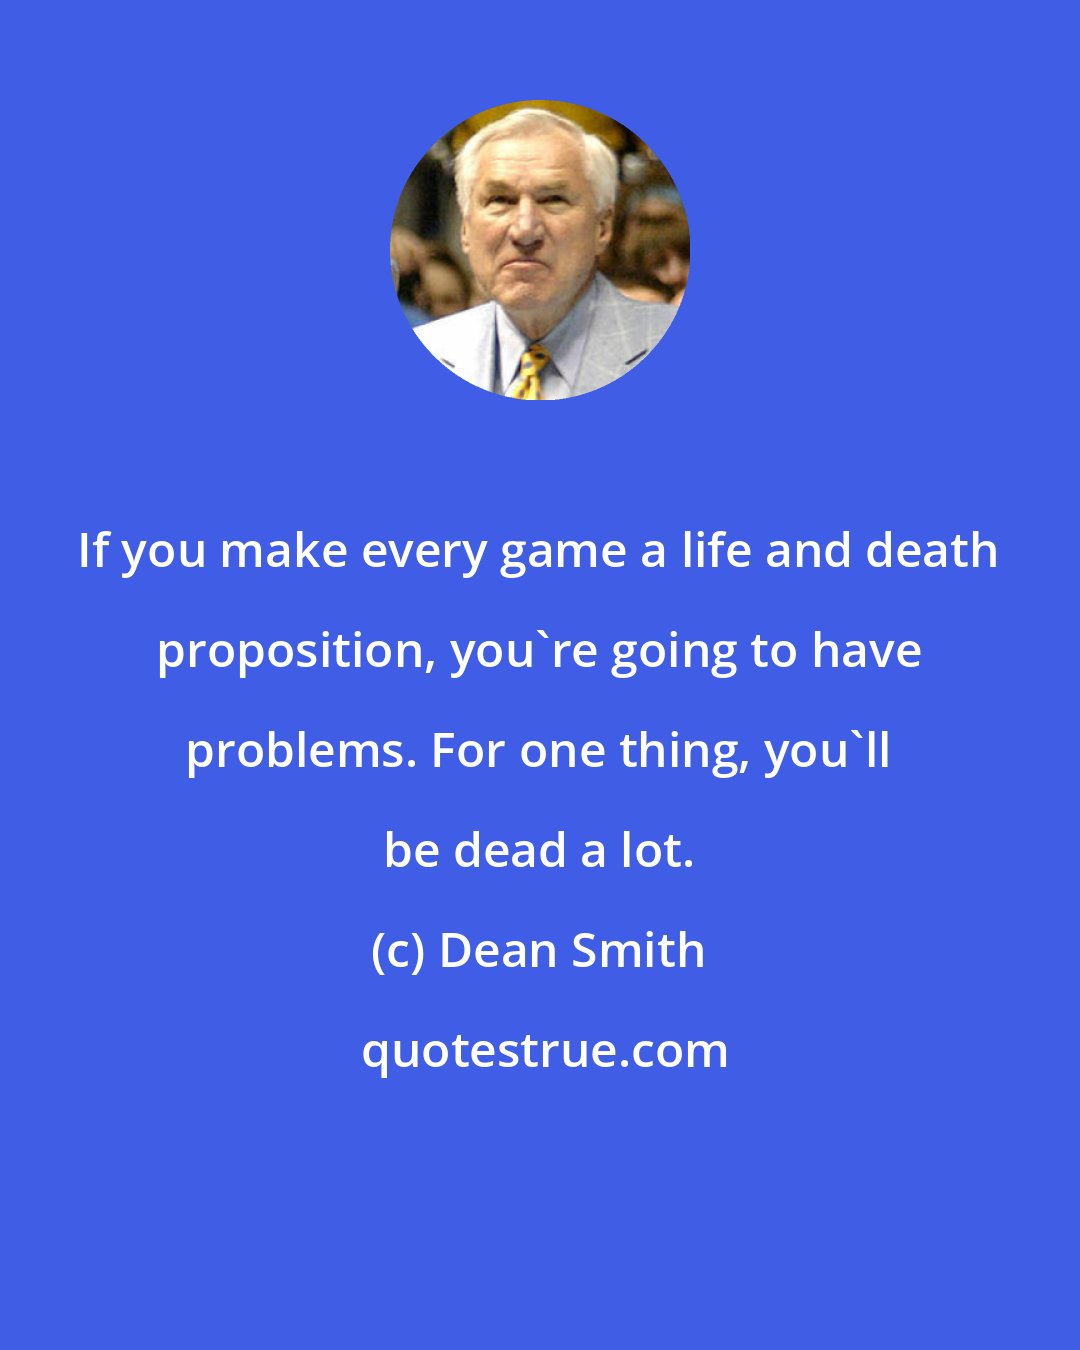 Dean Smith: If you make every game a life and death proposition, you're going to have problems. For one thing, you'll be dead a lot.